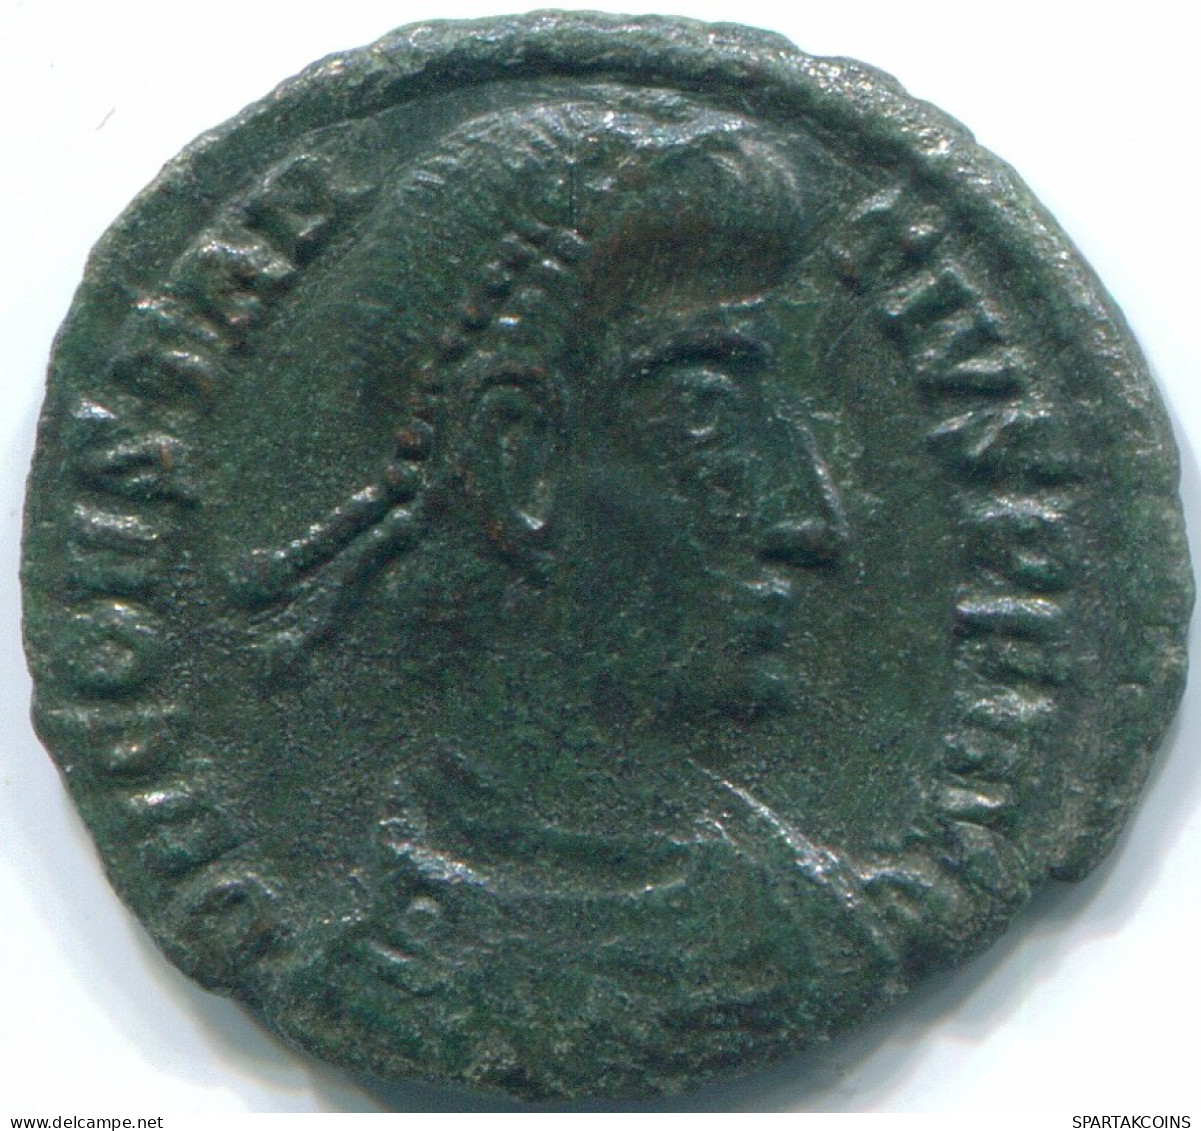 CONSTANTIUS II Cyzicus Mint AD 351-355 Soldier 2.08g/18mm #ROM1009.8.E.A - The Christian Empire (307 AD To 363 AD)